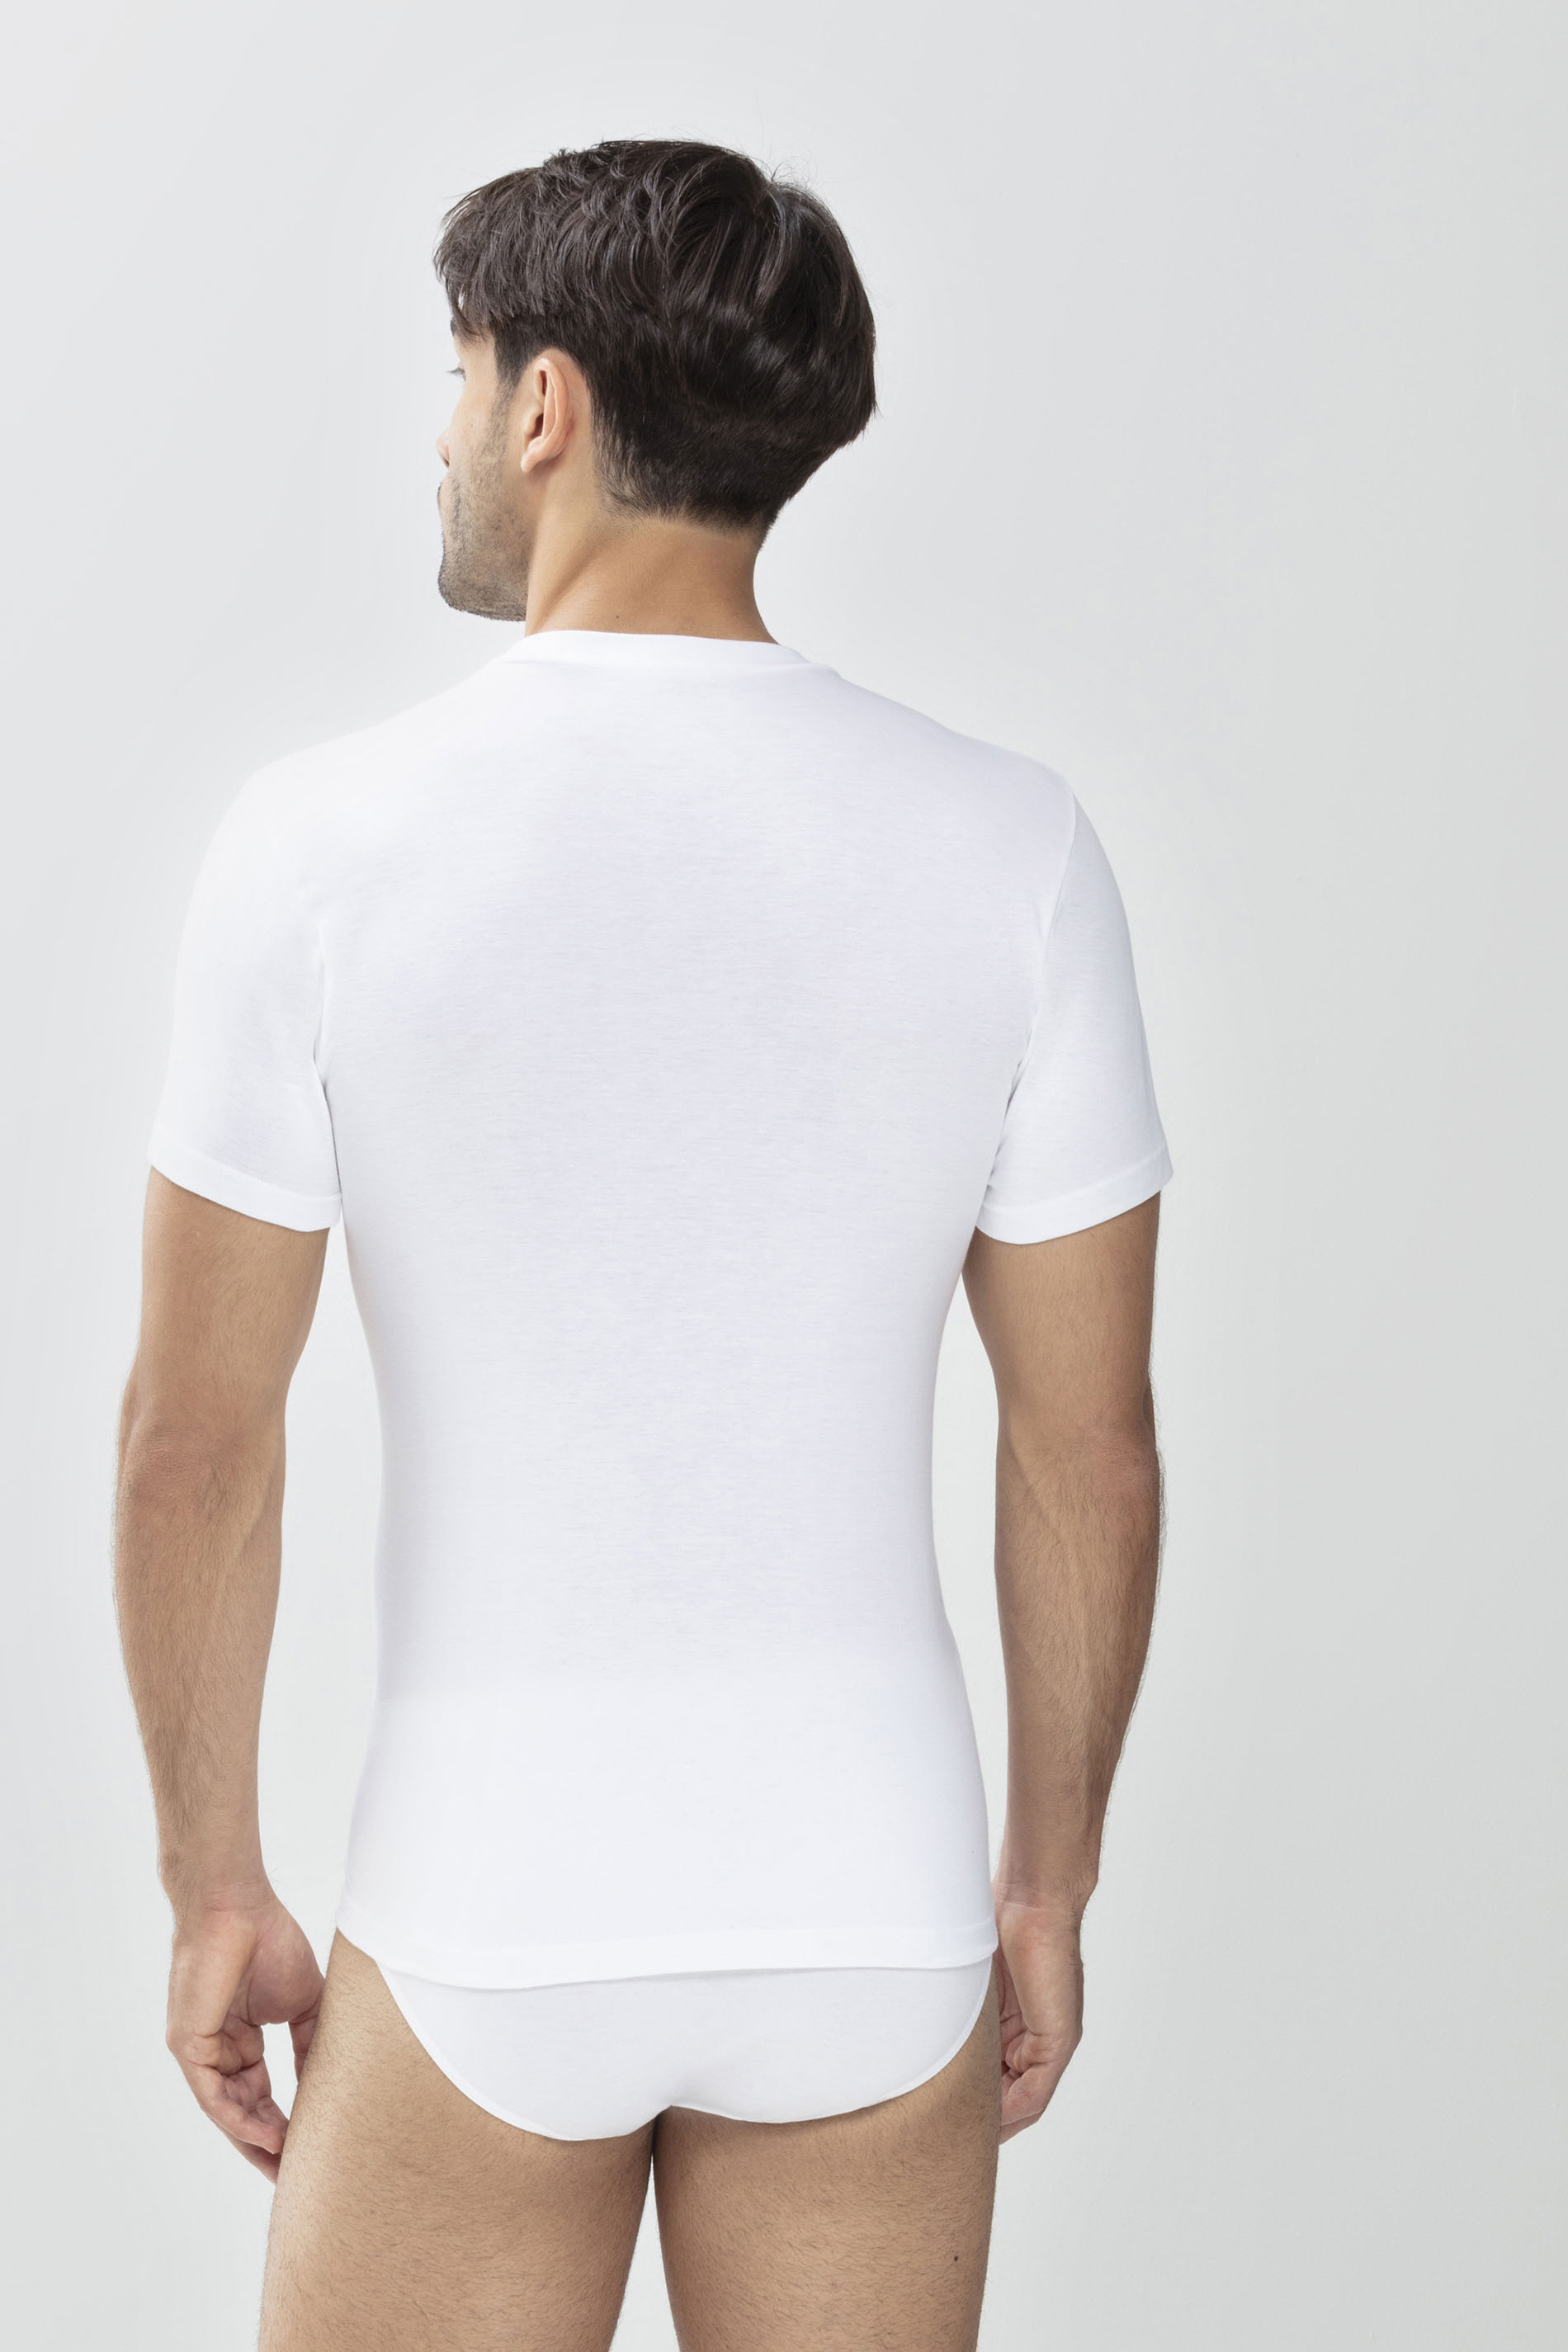 Olympia-Shirt White Serie Noblesse Rear View | mey®